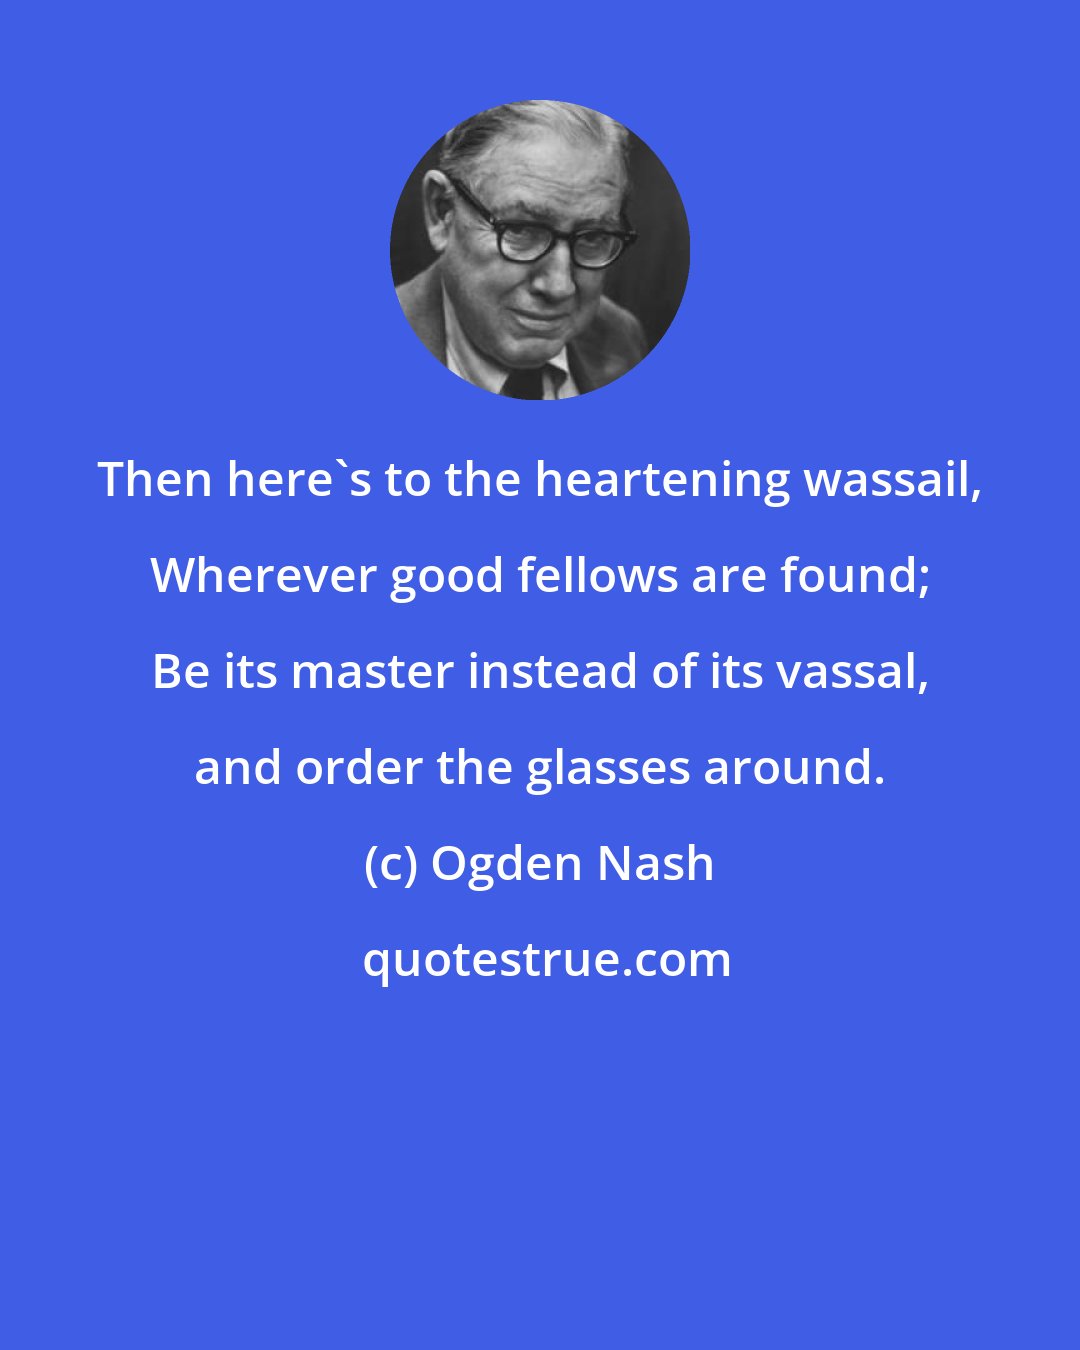 Ogden Nash: Then here's to the heartening wassail, Wherever good fellows are found; Be its master instead of its vassal, and order the glasses around.